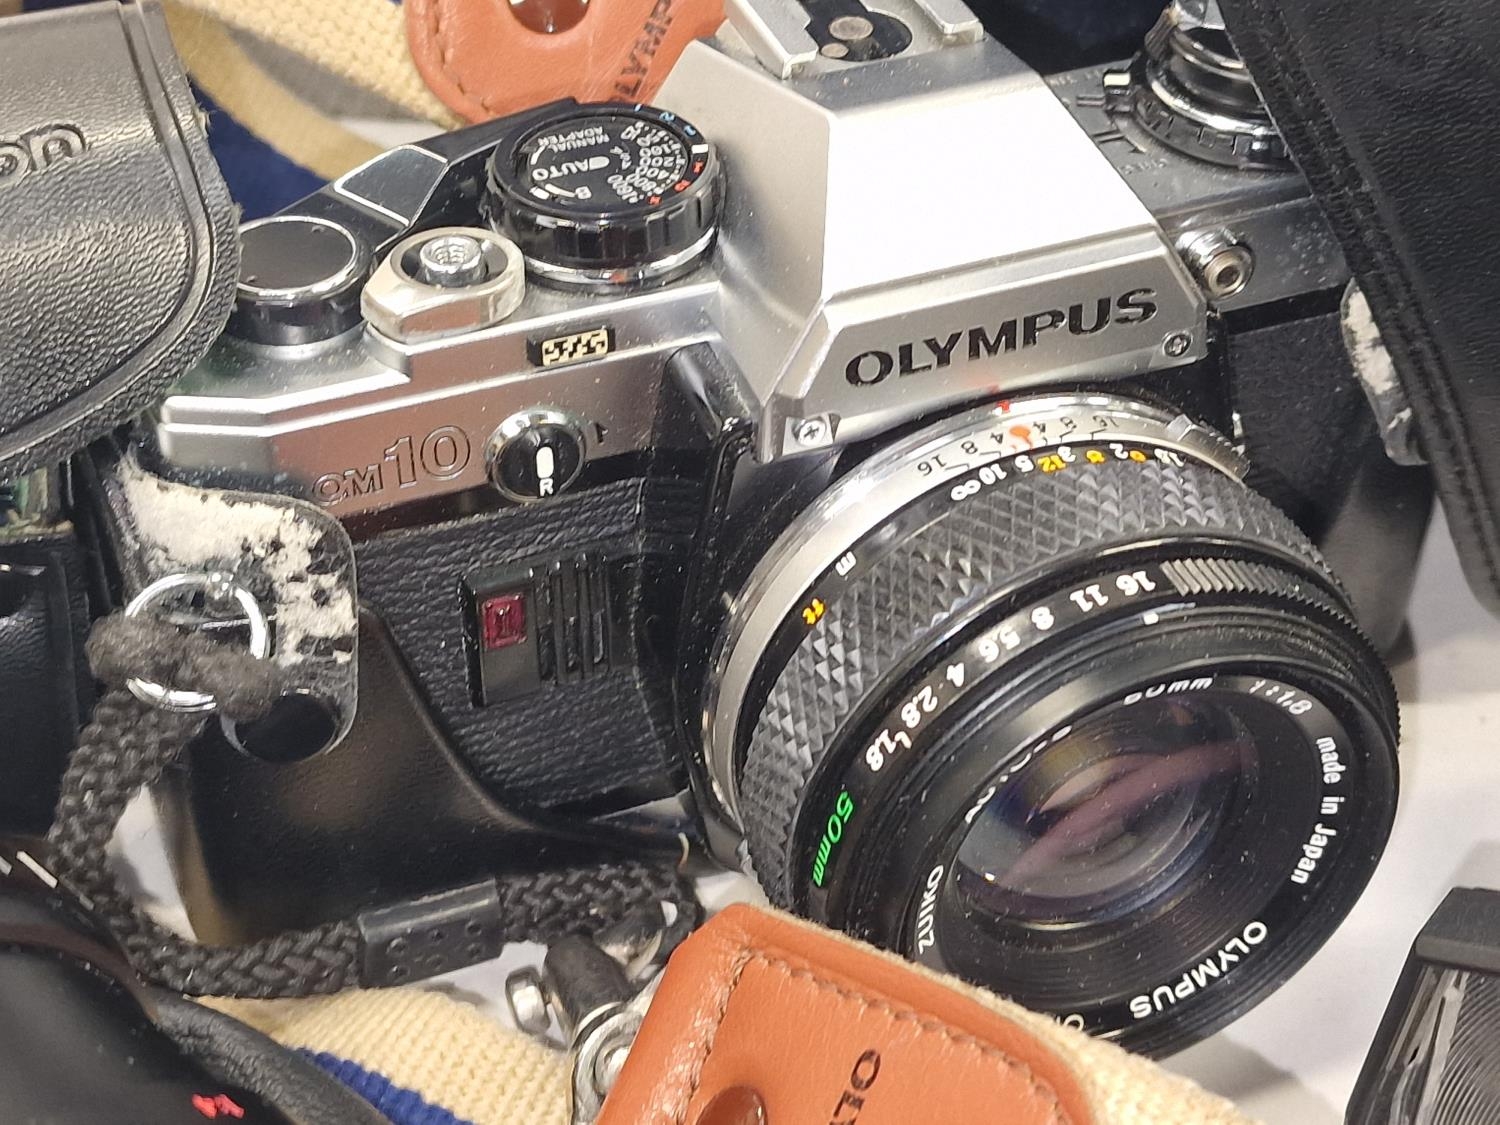 Olympus OM10 camera together with some lenses and accessories in an Olympus carry bag. - Image 2 of 3